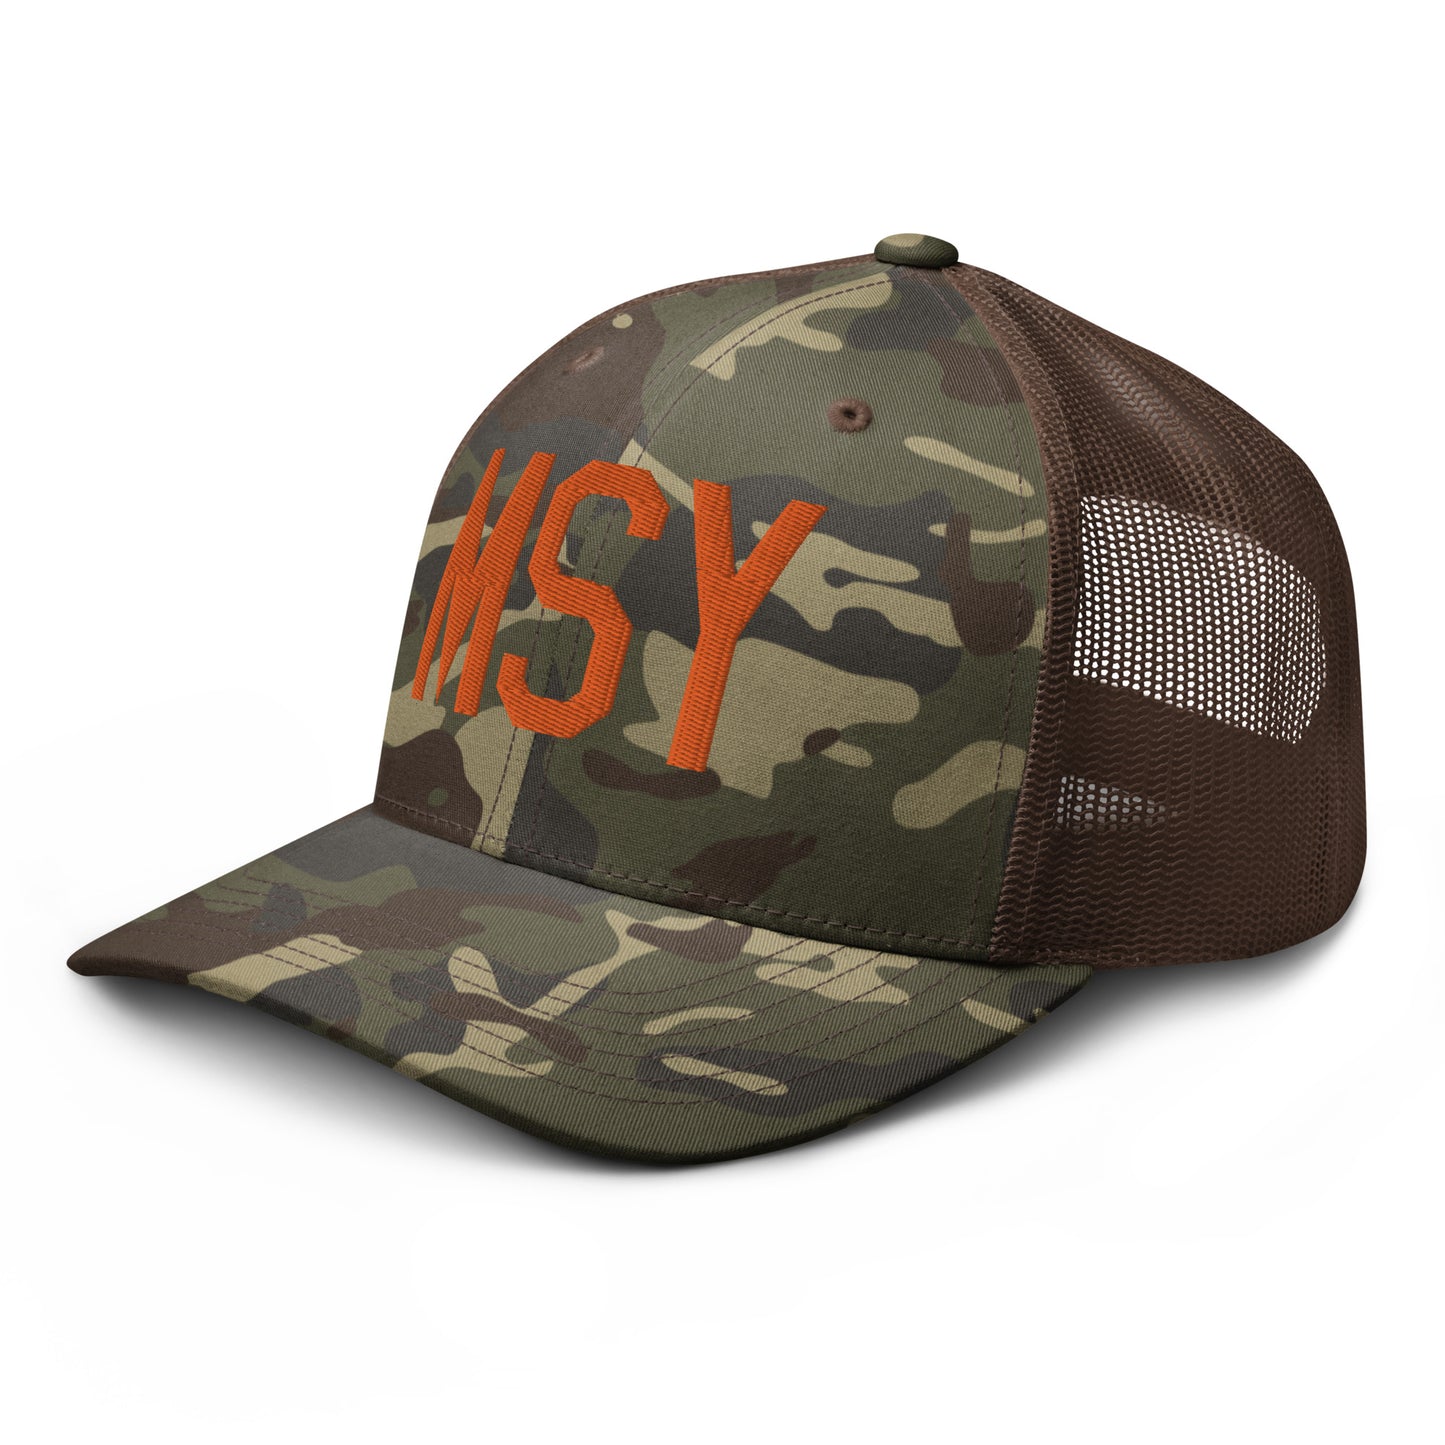 Airport Code Camouflage Trucker Hat - Orange • MSY New Orleans • YHM Designs - Image 15